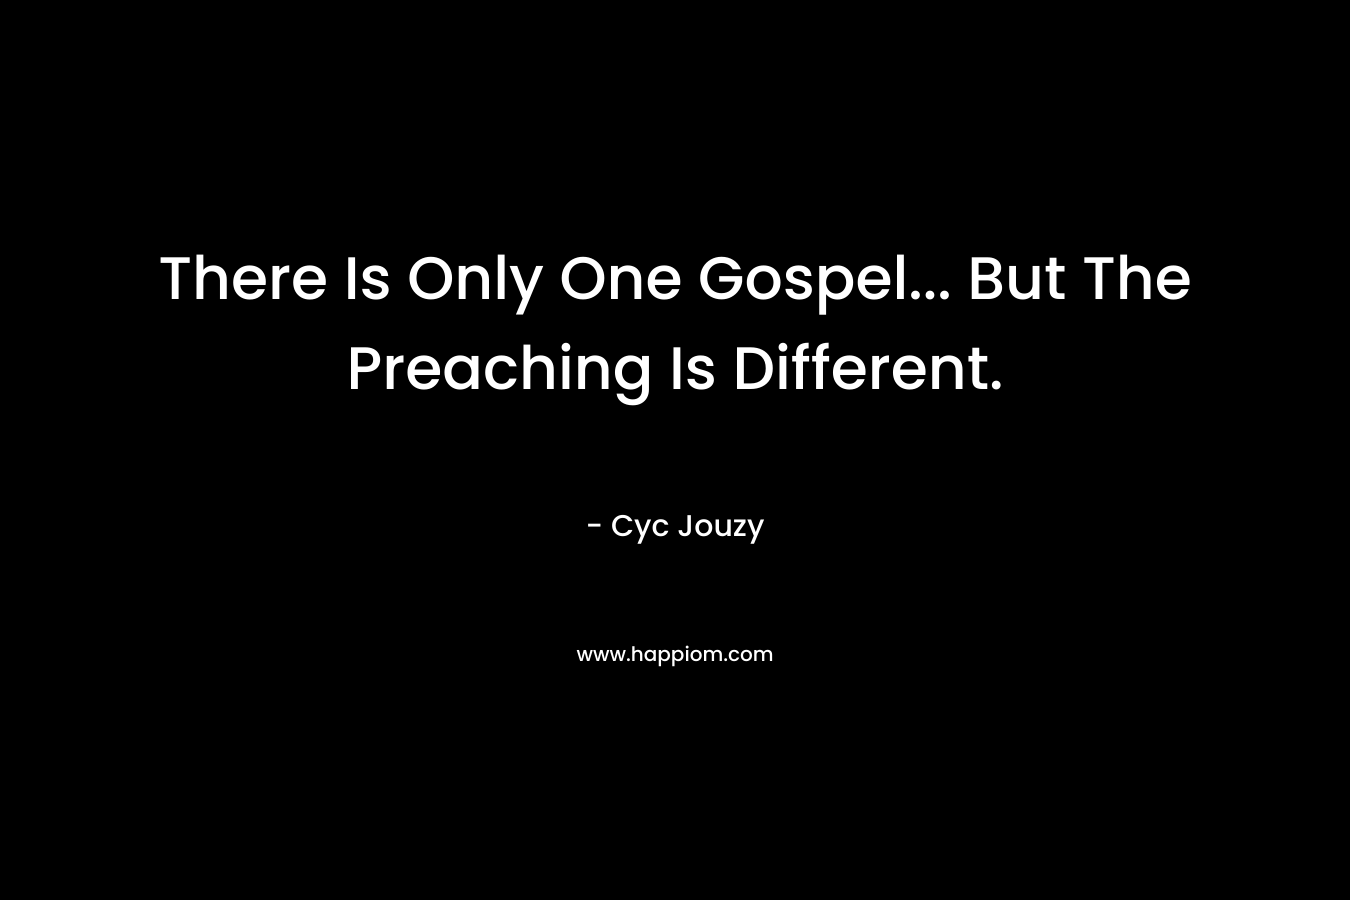 There Is Only One Gospel... But The Preaching Is Different.